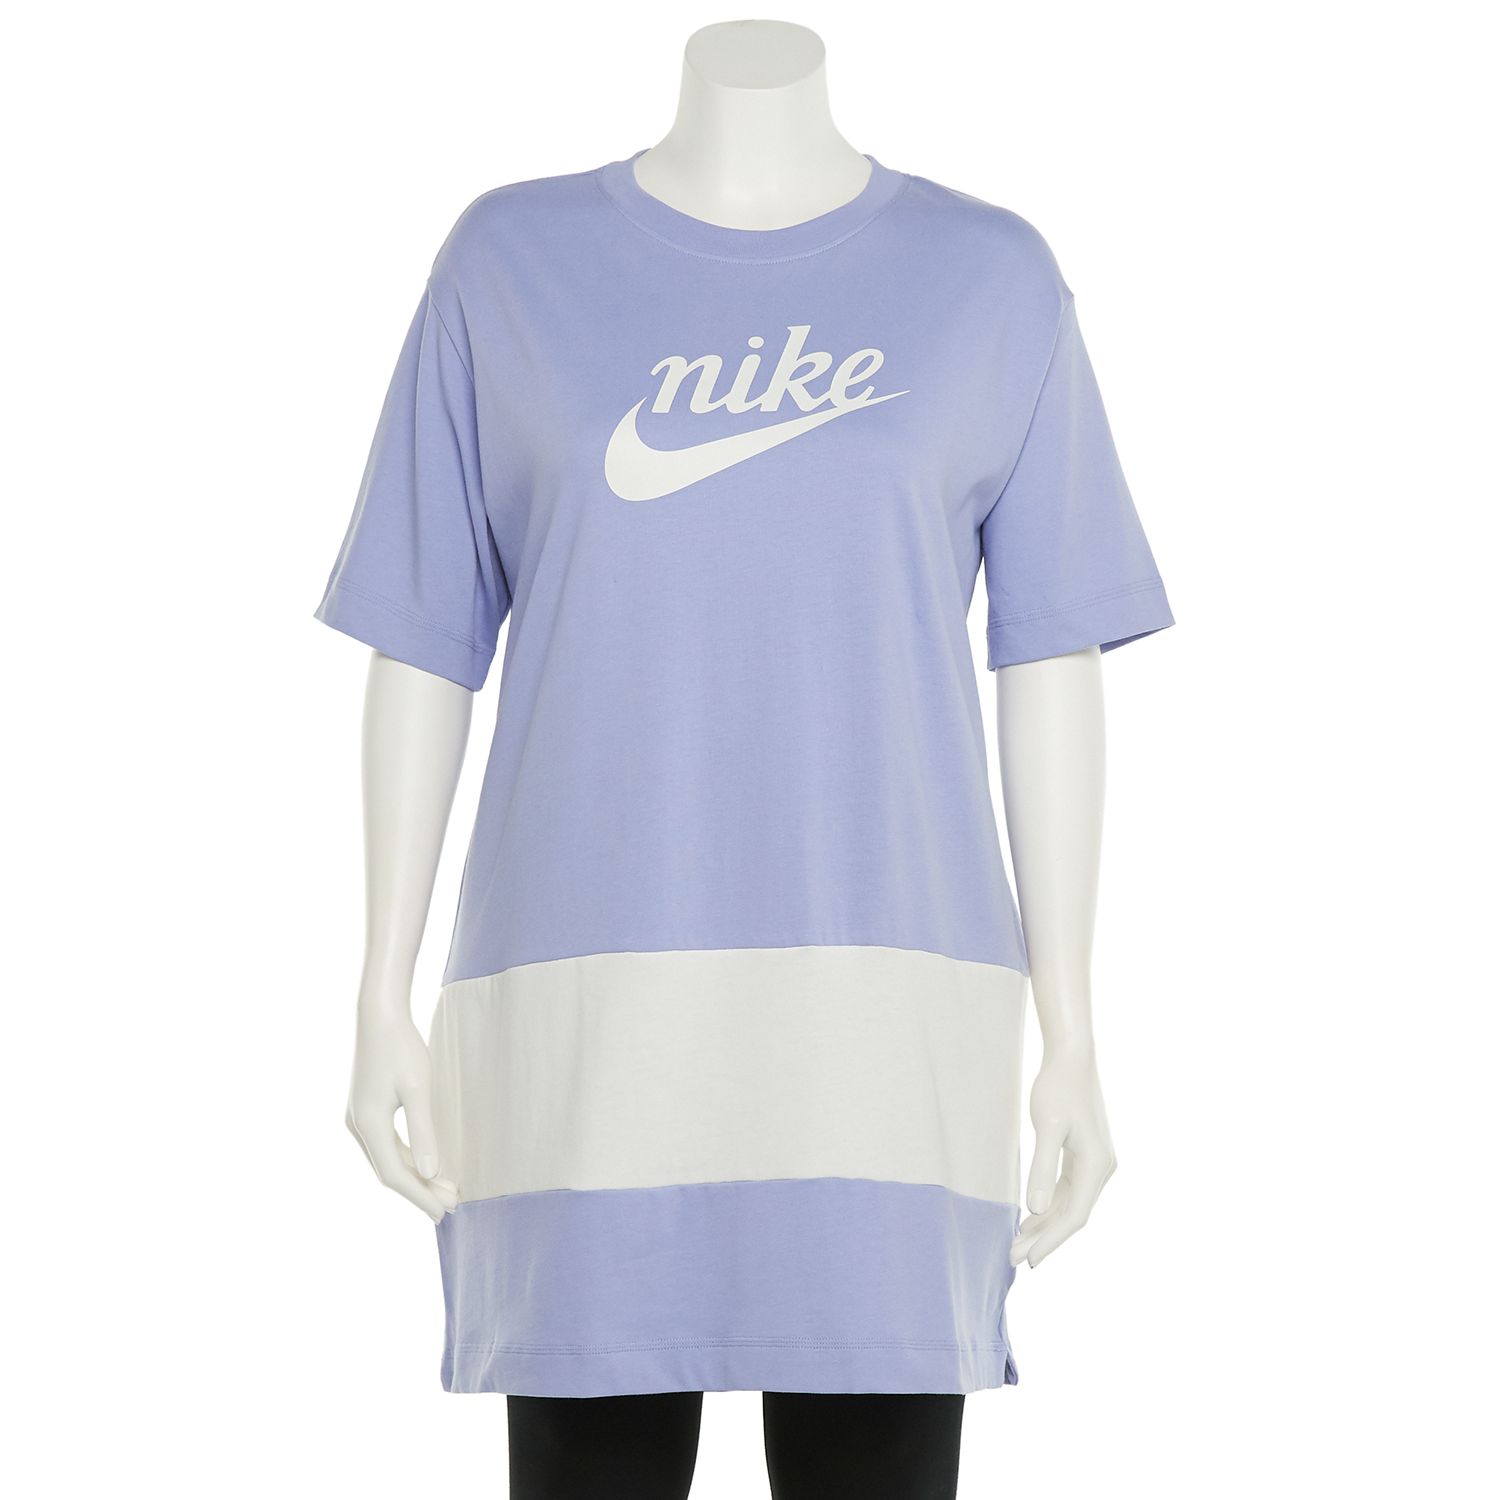 nike clothes for plus size